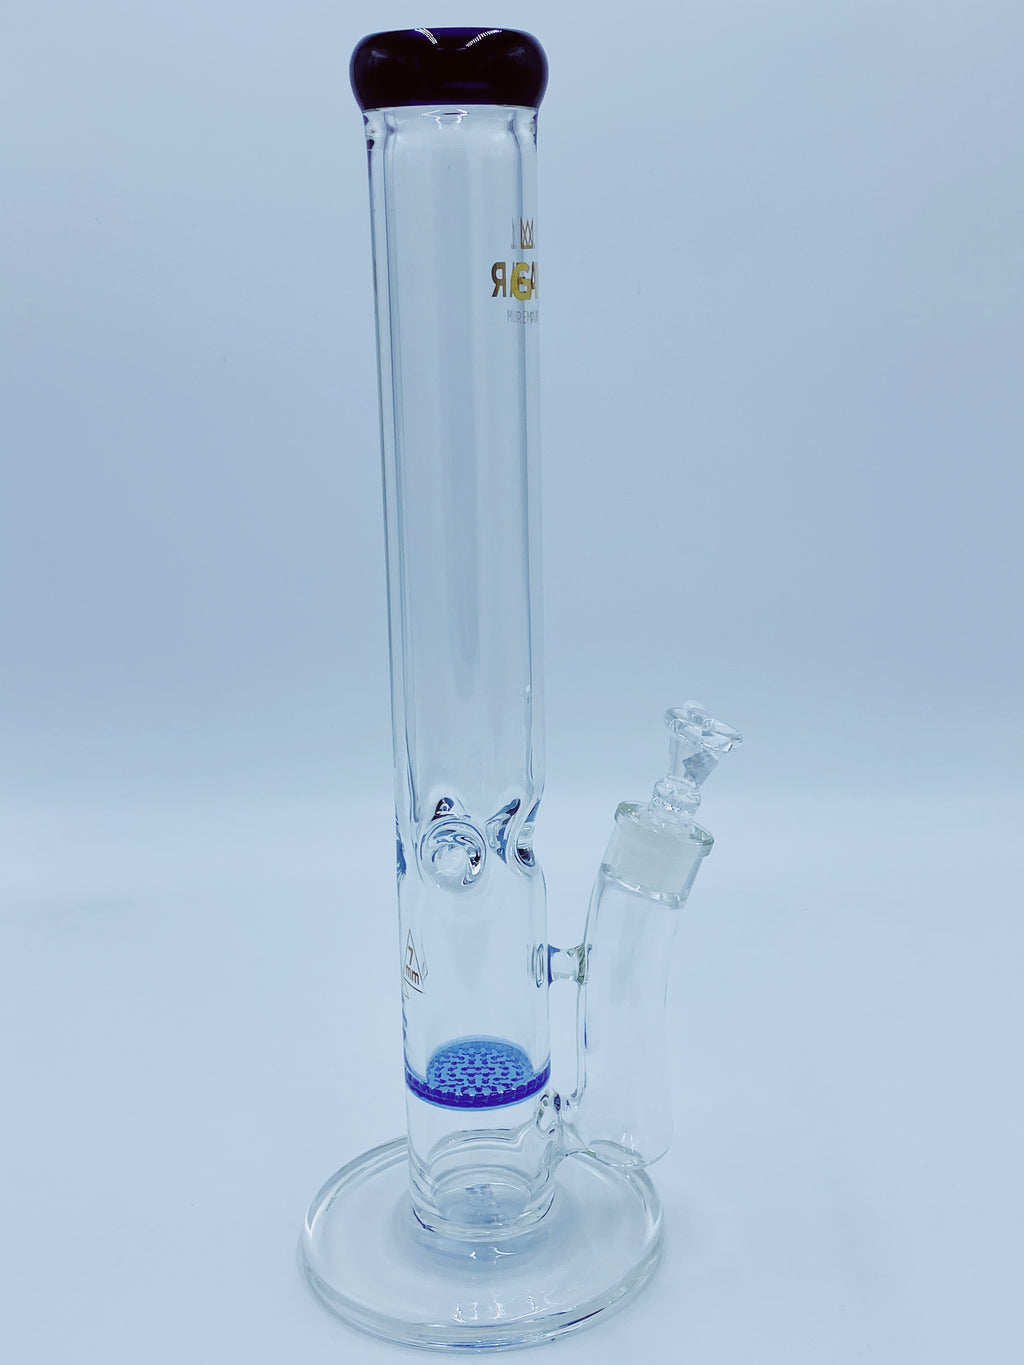 GEAR PREMIUM 7MM HONEYCOMB - Smoke Country - Land of the artistic glass blown bongs